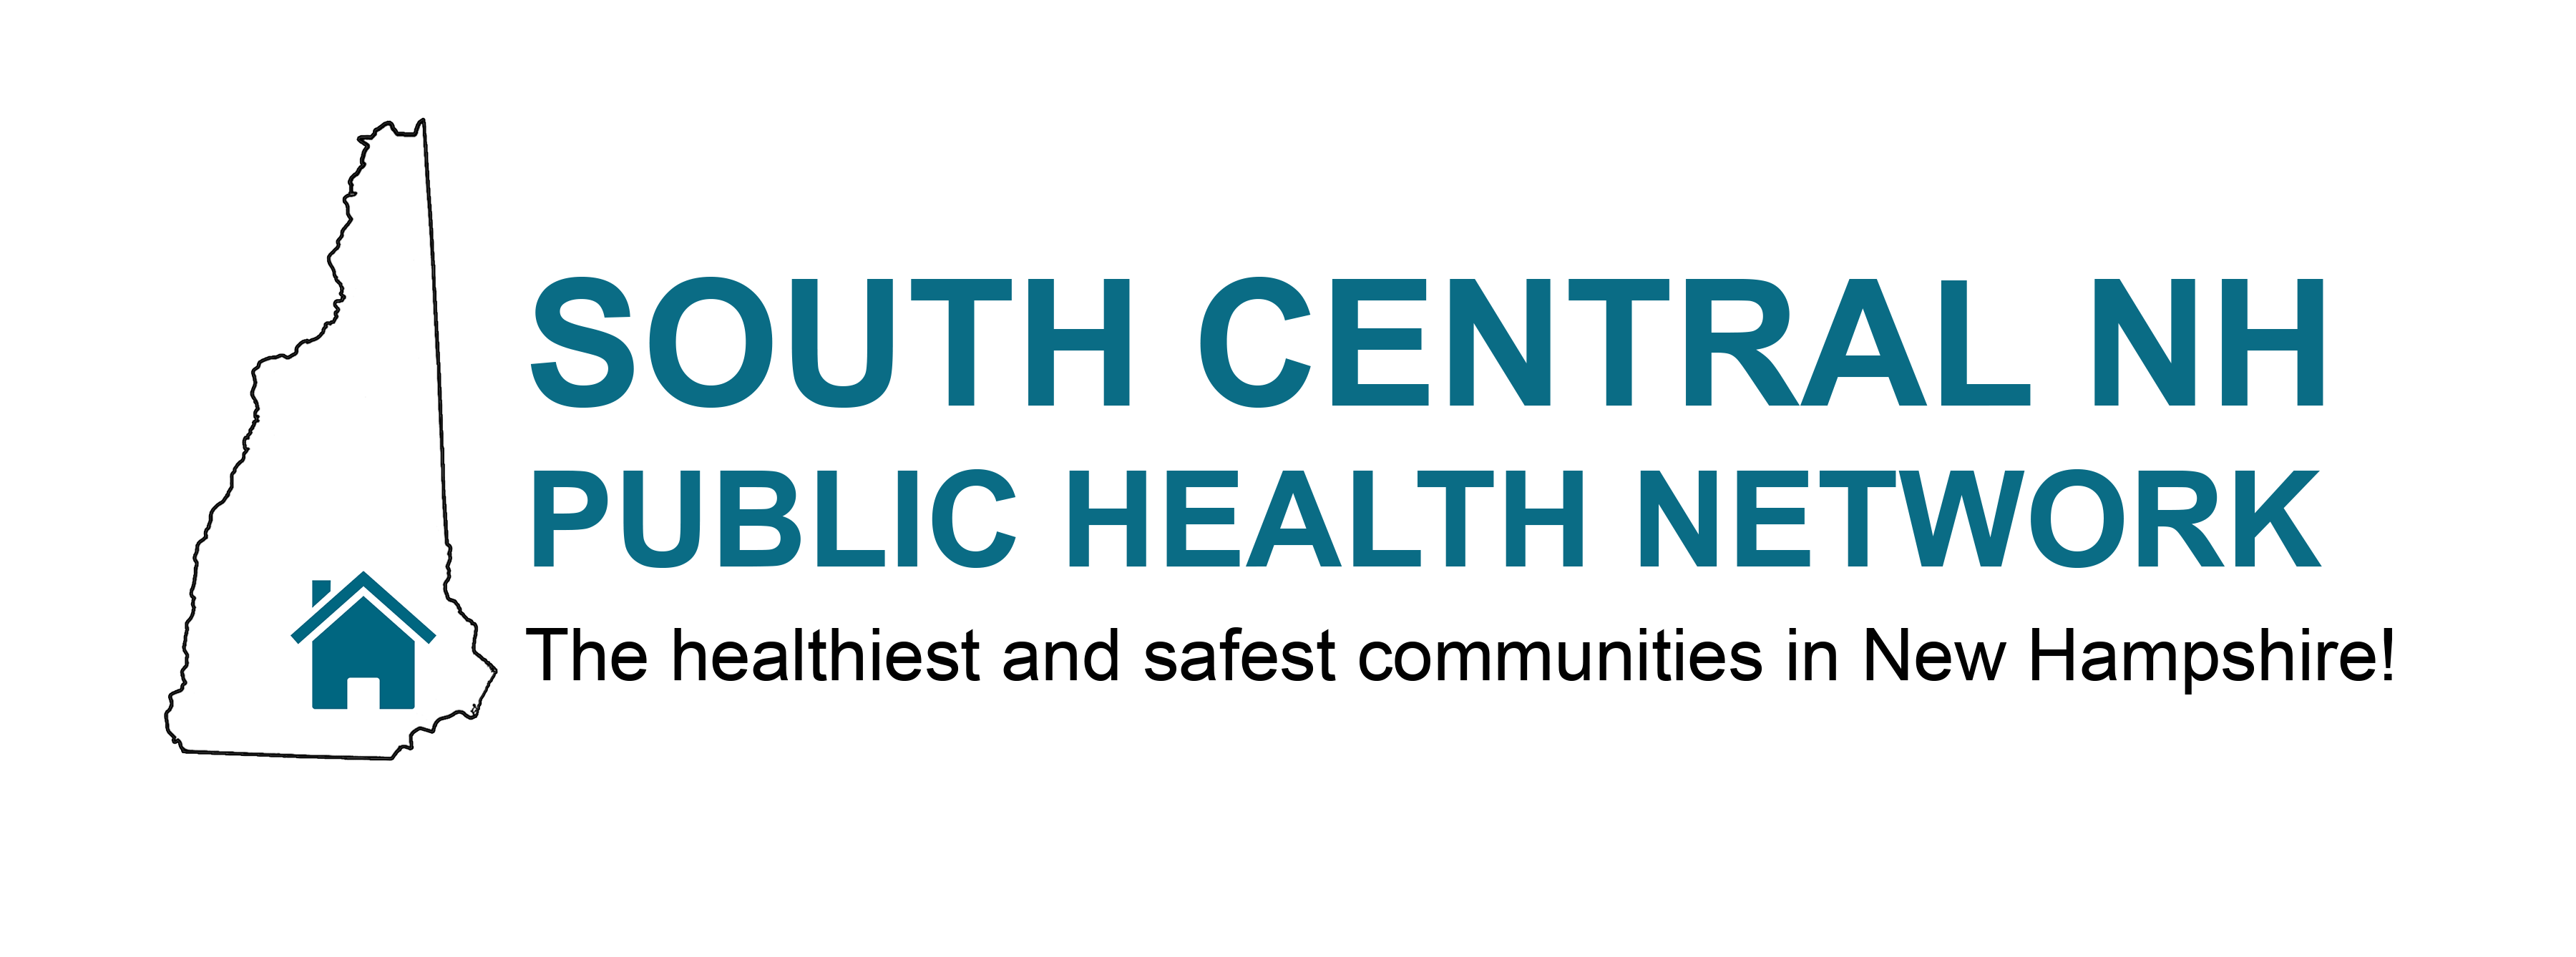 The South Central Public Health Network's Emergency Preparedness Task Force